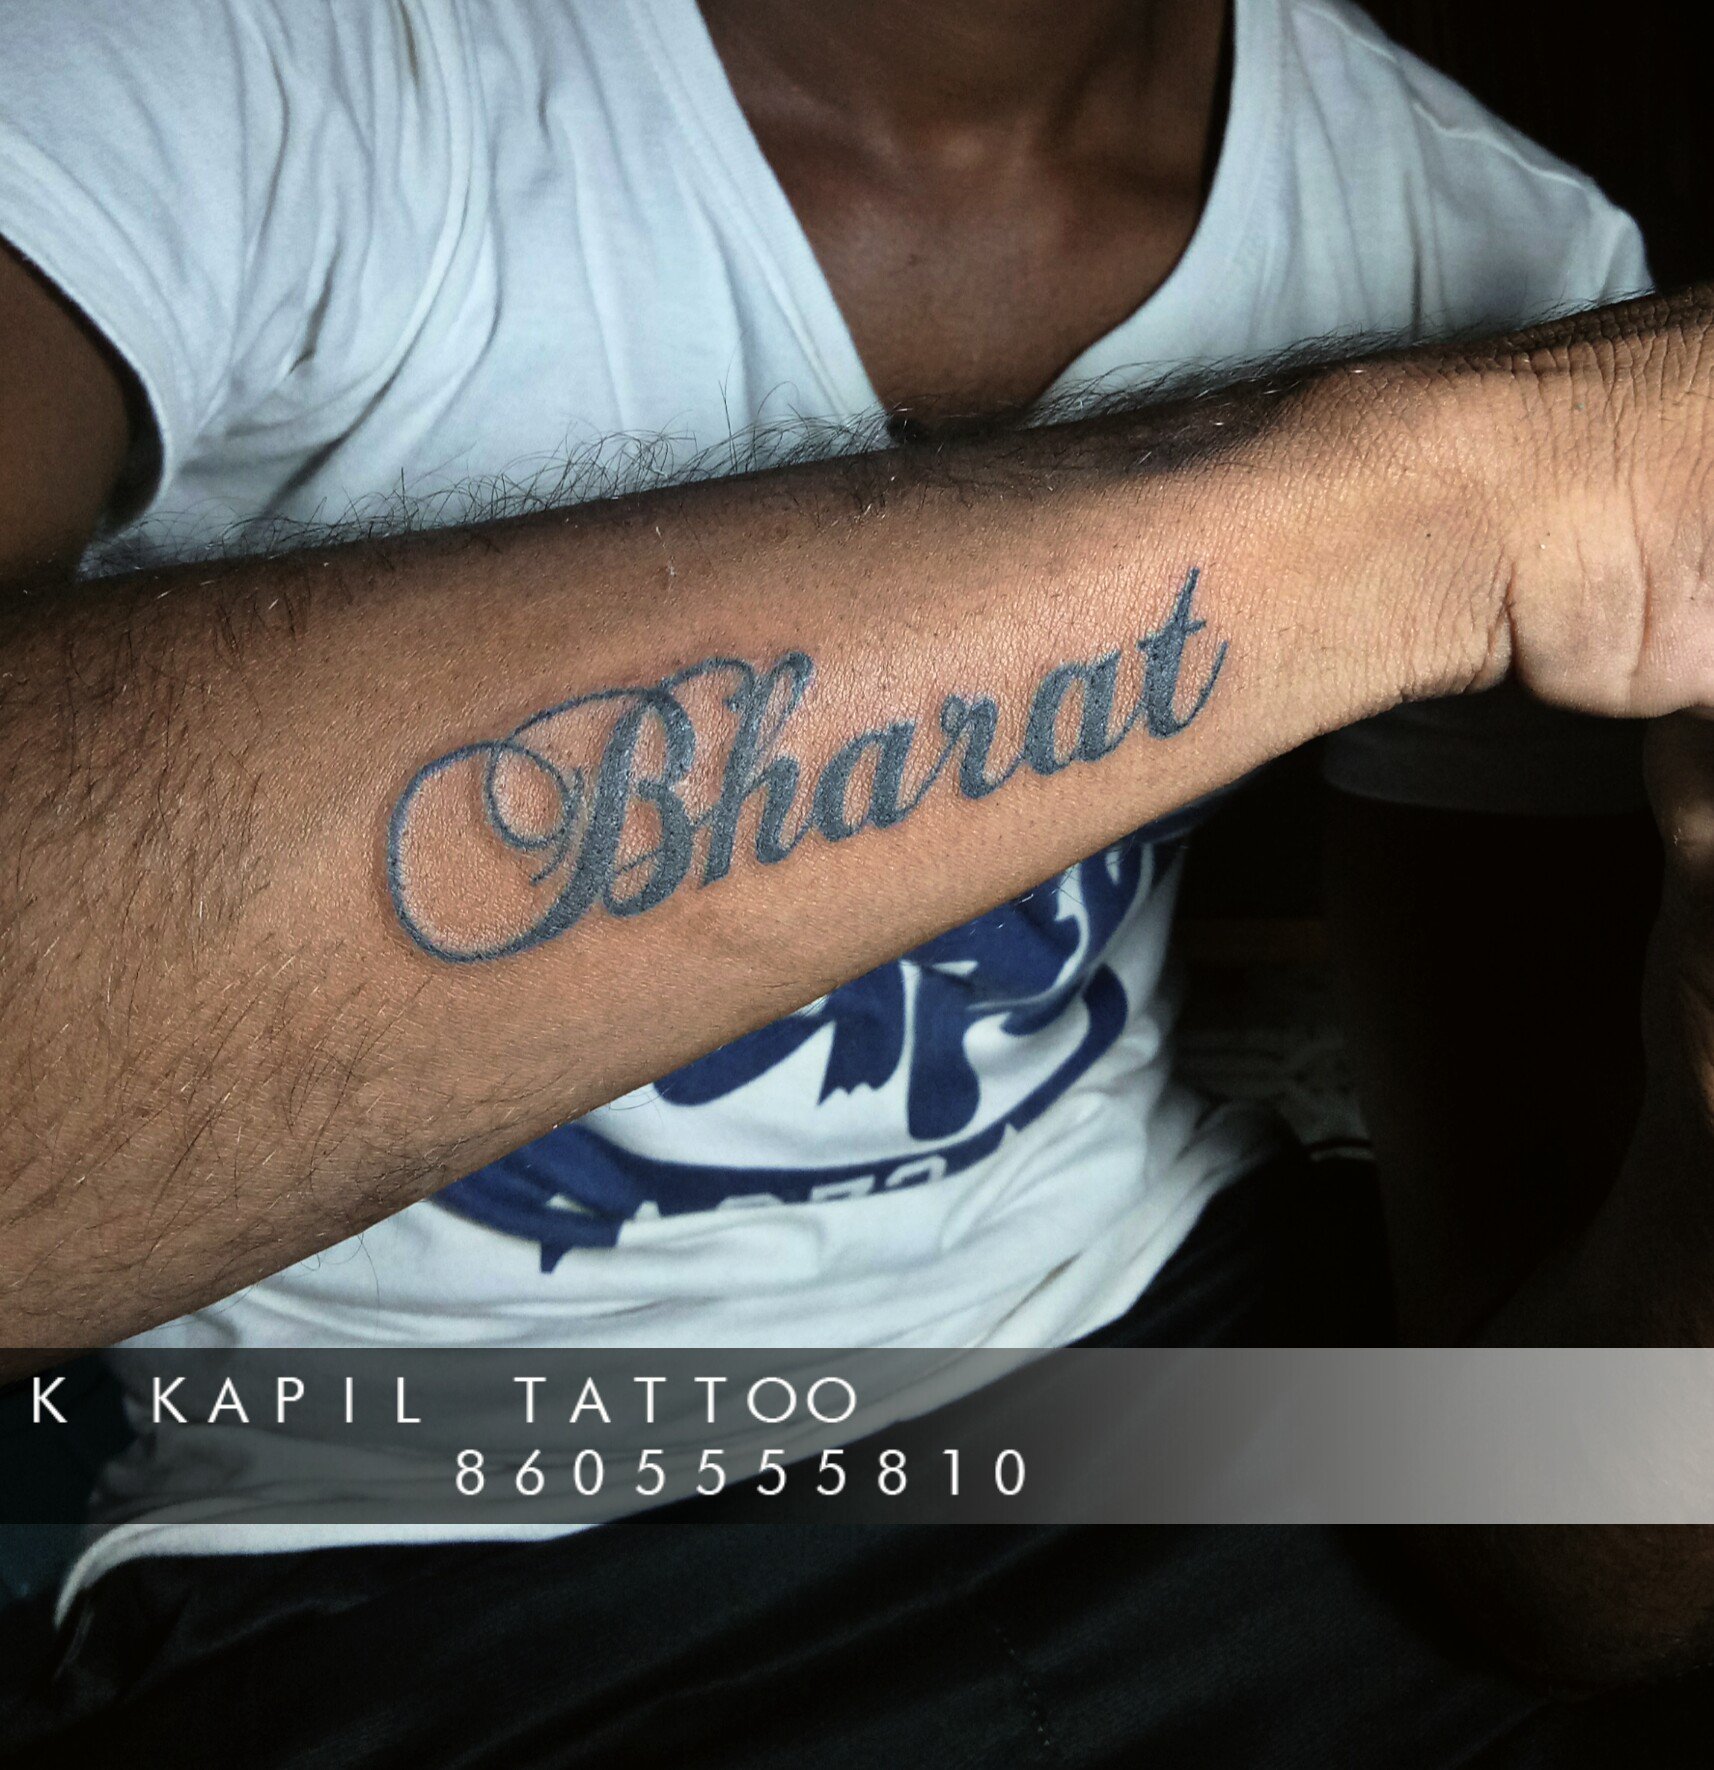 Aggregate 86+ about bharat tattoo designs latest .vn